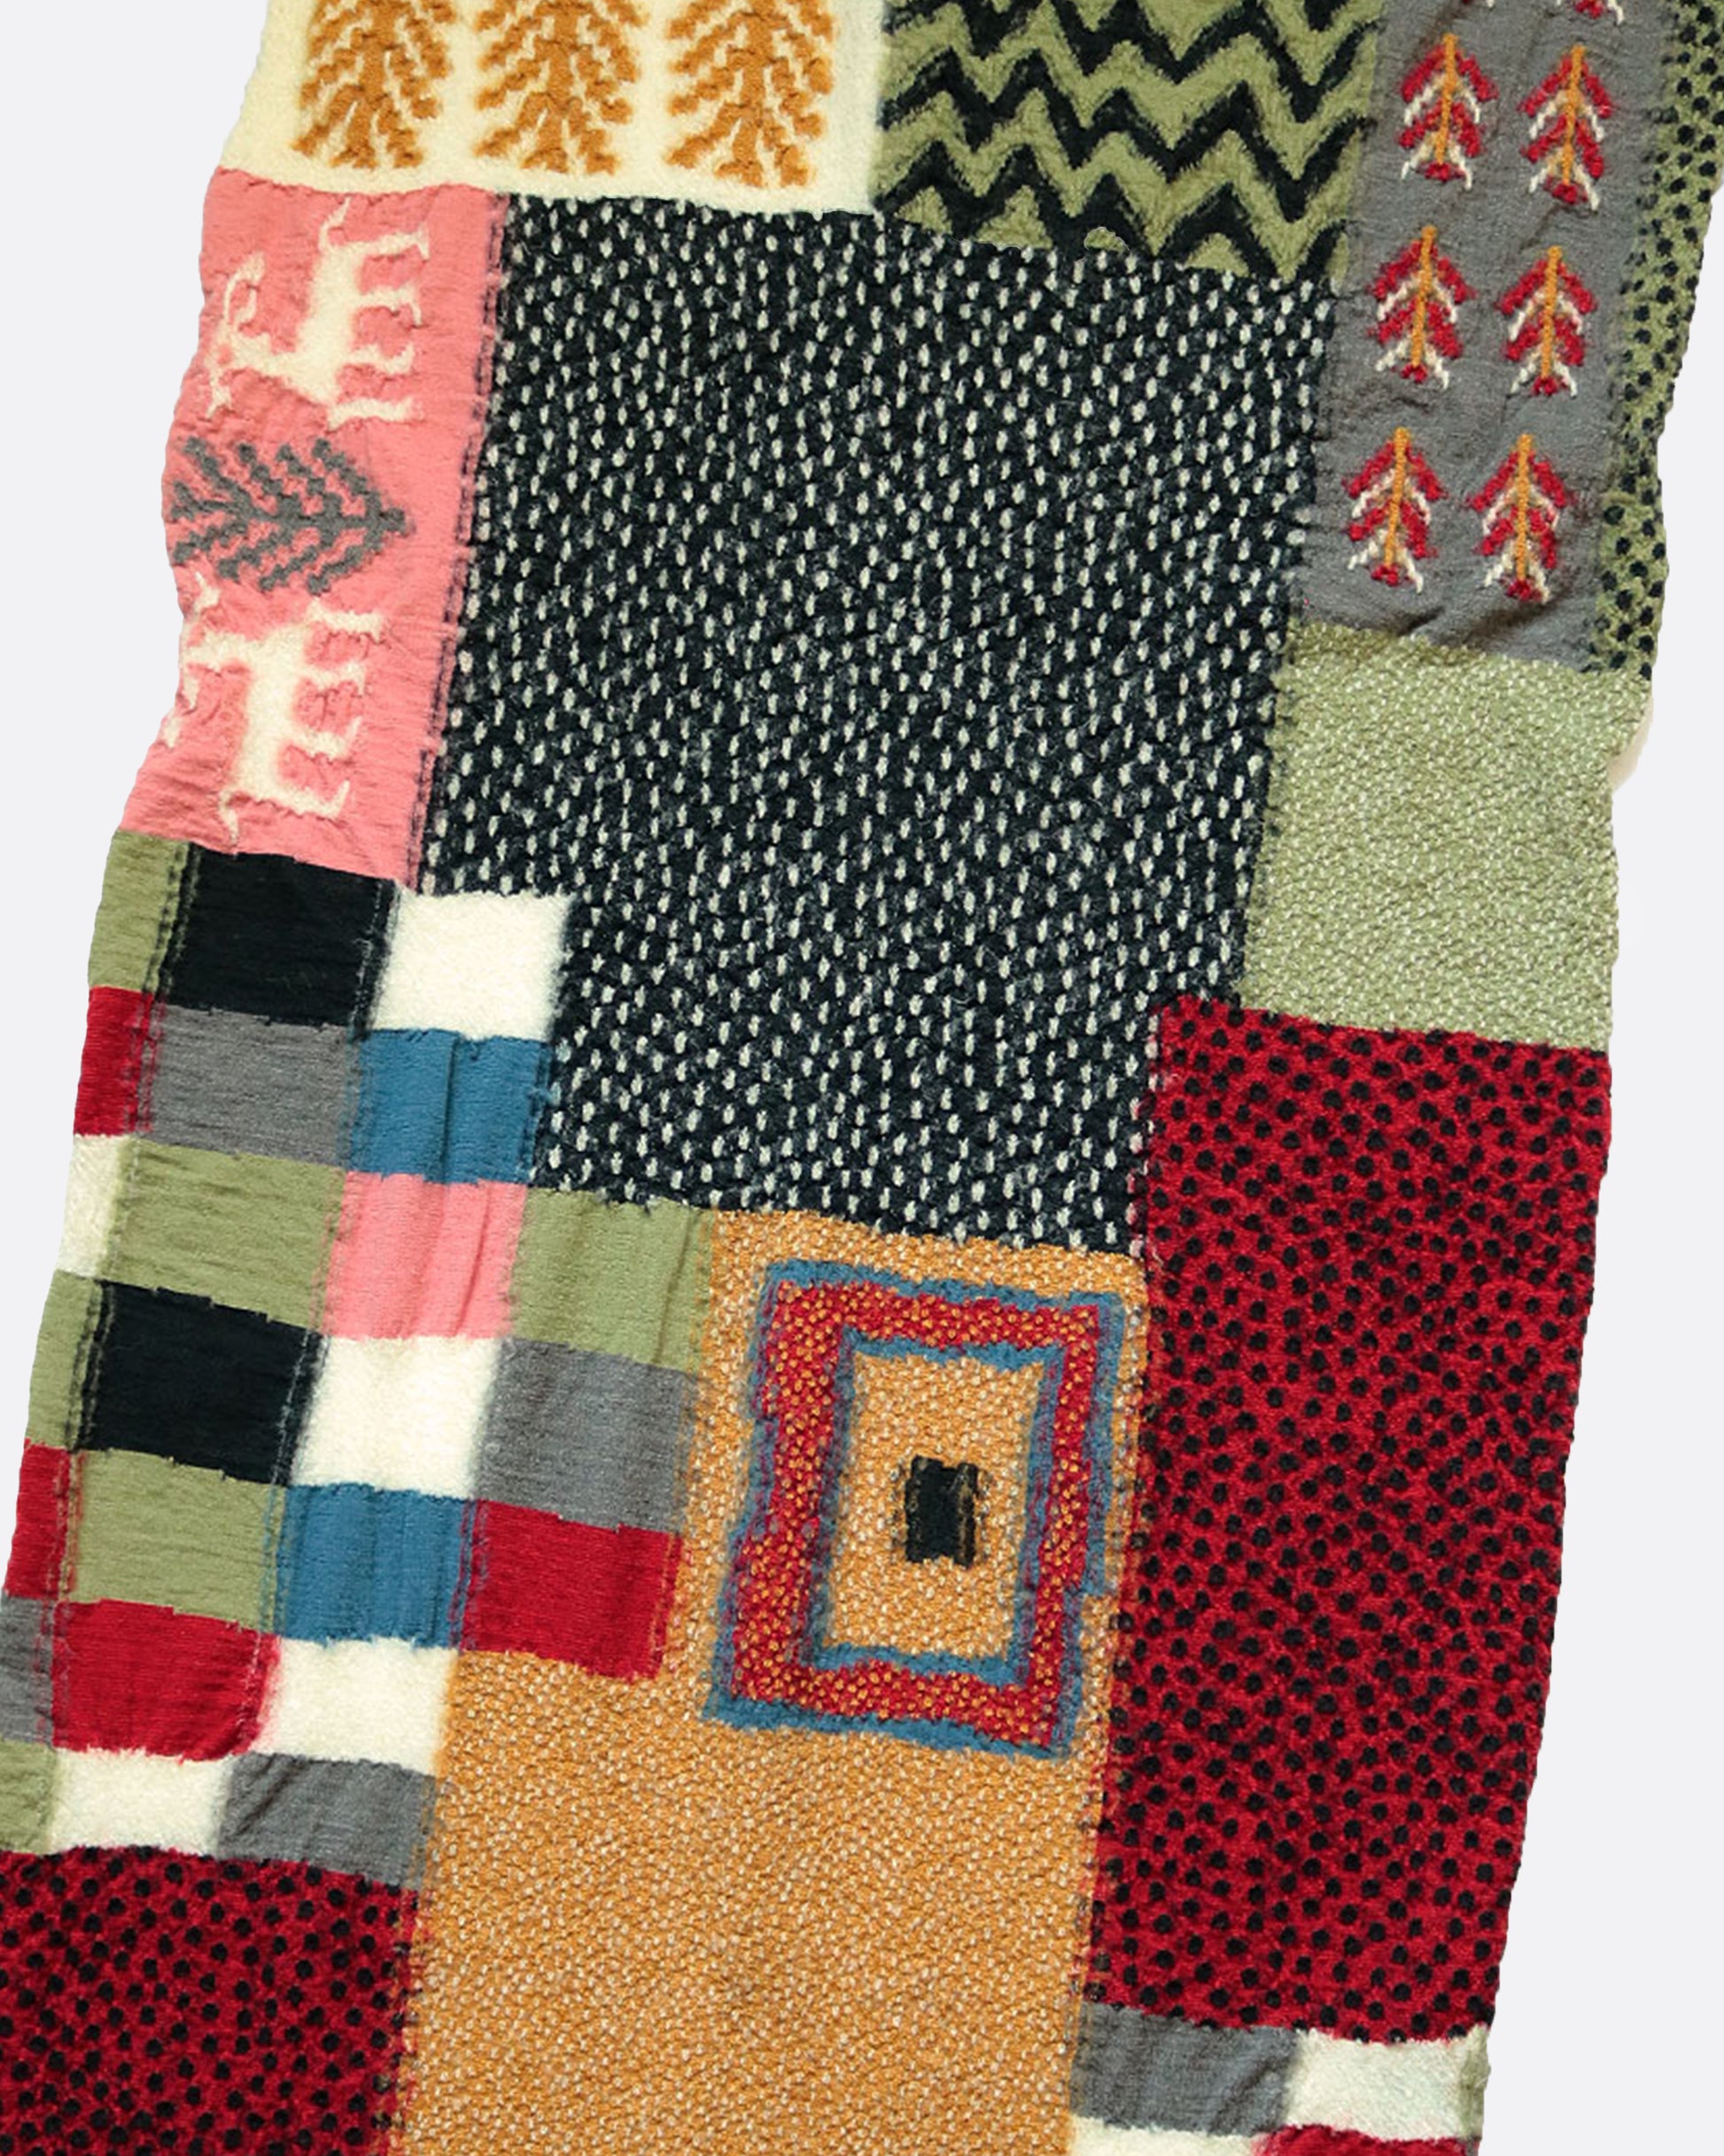 Inspired by different patterns found in gabbeh carpets, this time in shades of green, red and mustard.